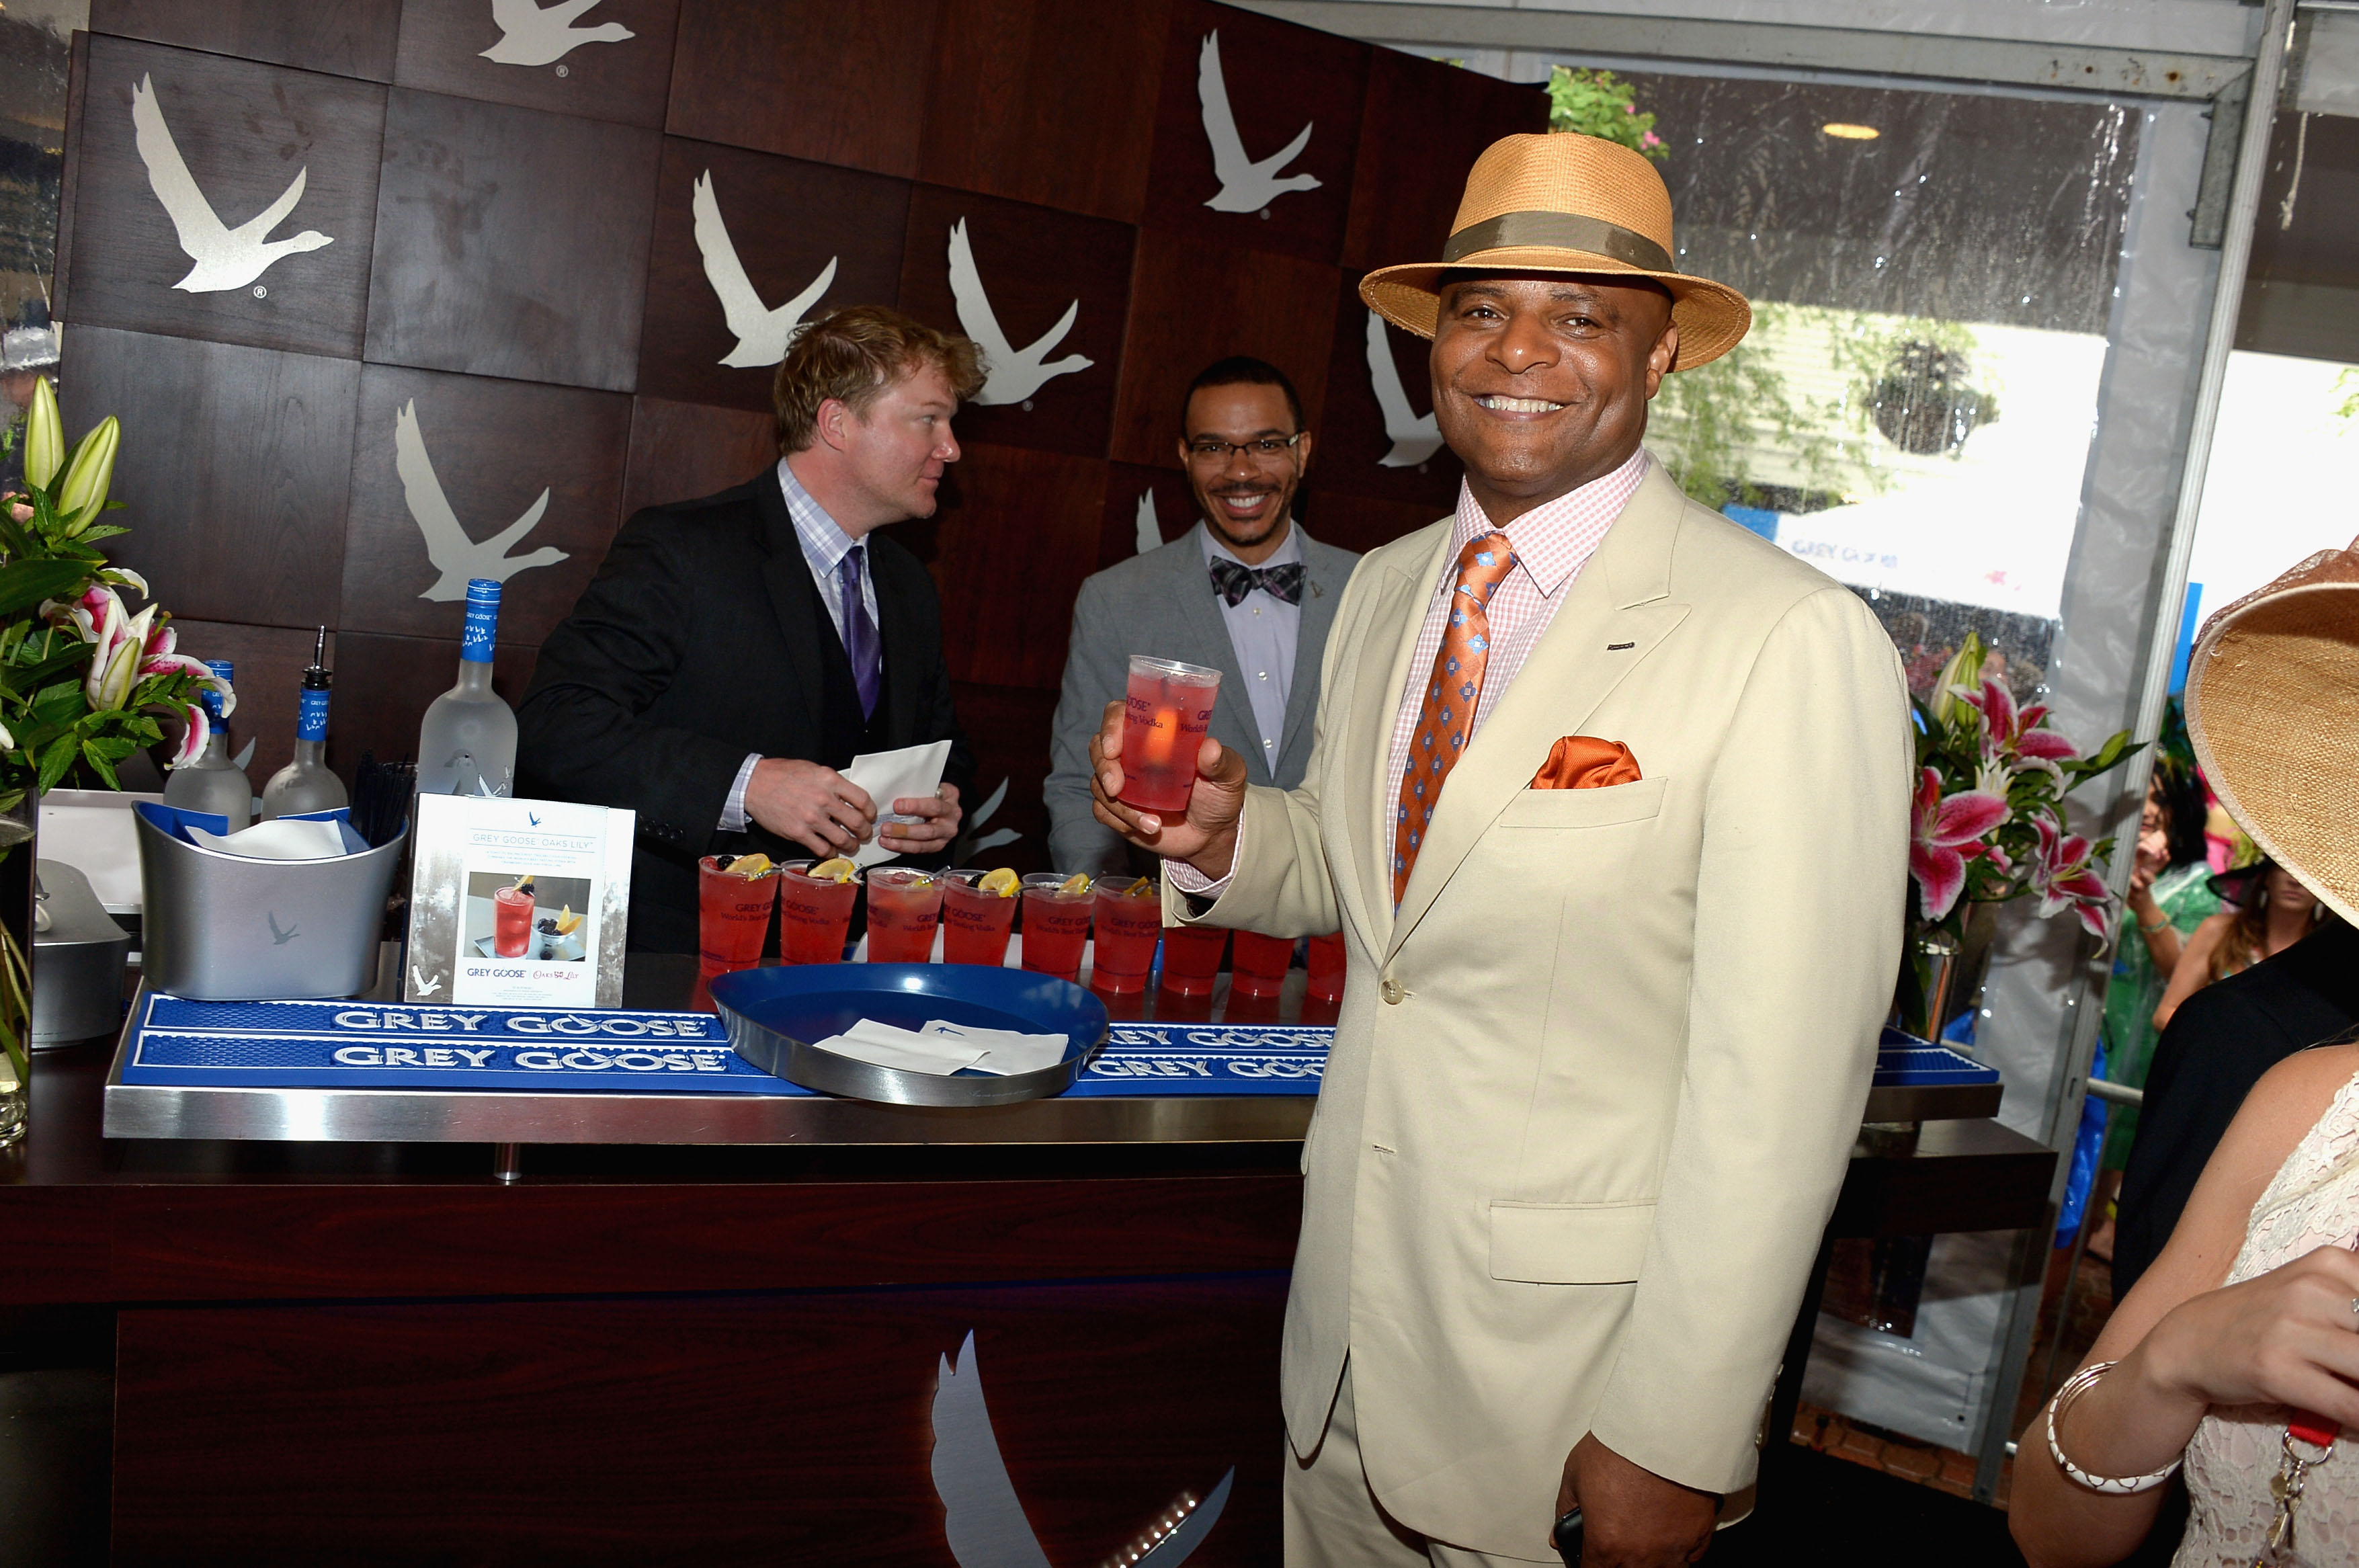 LOUISVILLE, KY - MAY 04:  Warren Moon at the GREY GOOSE Red Carpet Lounge at the Kentucky Derby at Churchill Downs on May 4, 2013 in Louisville, Kentucky.  (Photo by Theo Wargo/Getty Images for GREY GOOSE)